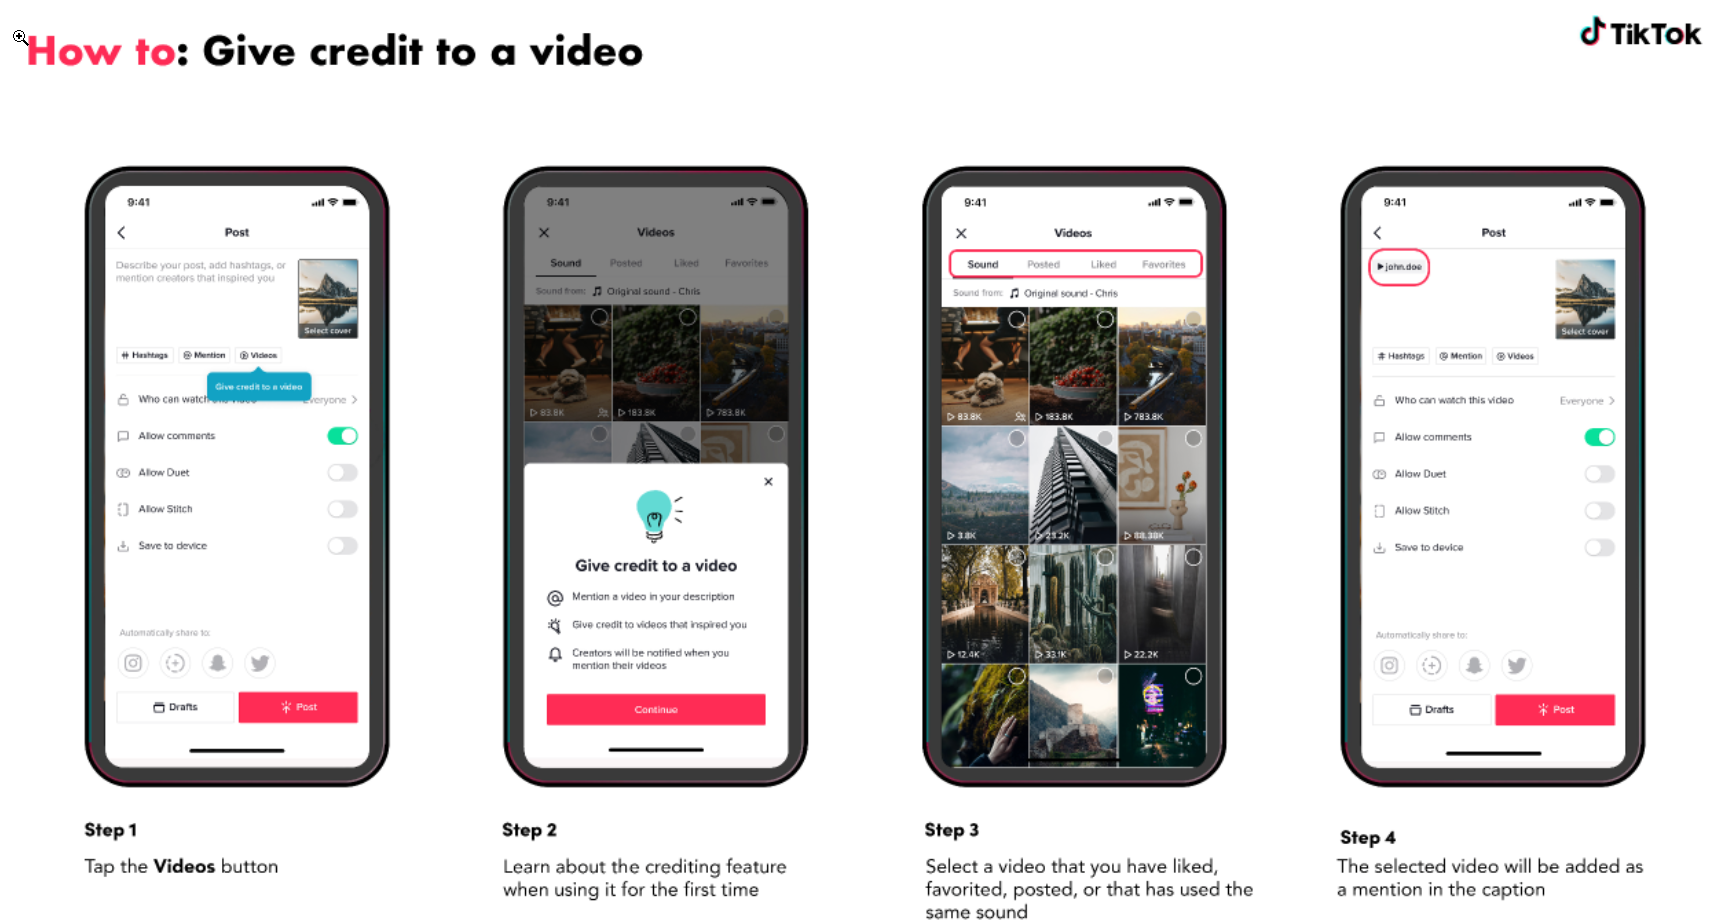 Tiktok Launches Its First Creator Crediting Tool To Help Video Creators Cite Their Inspiration